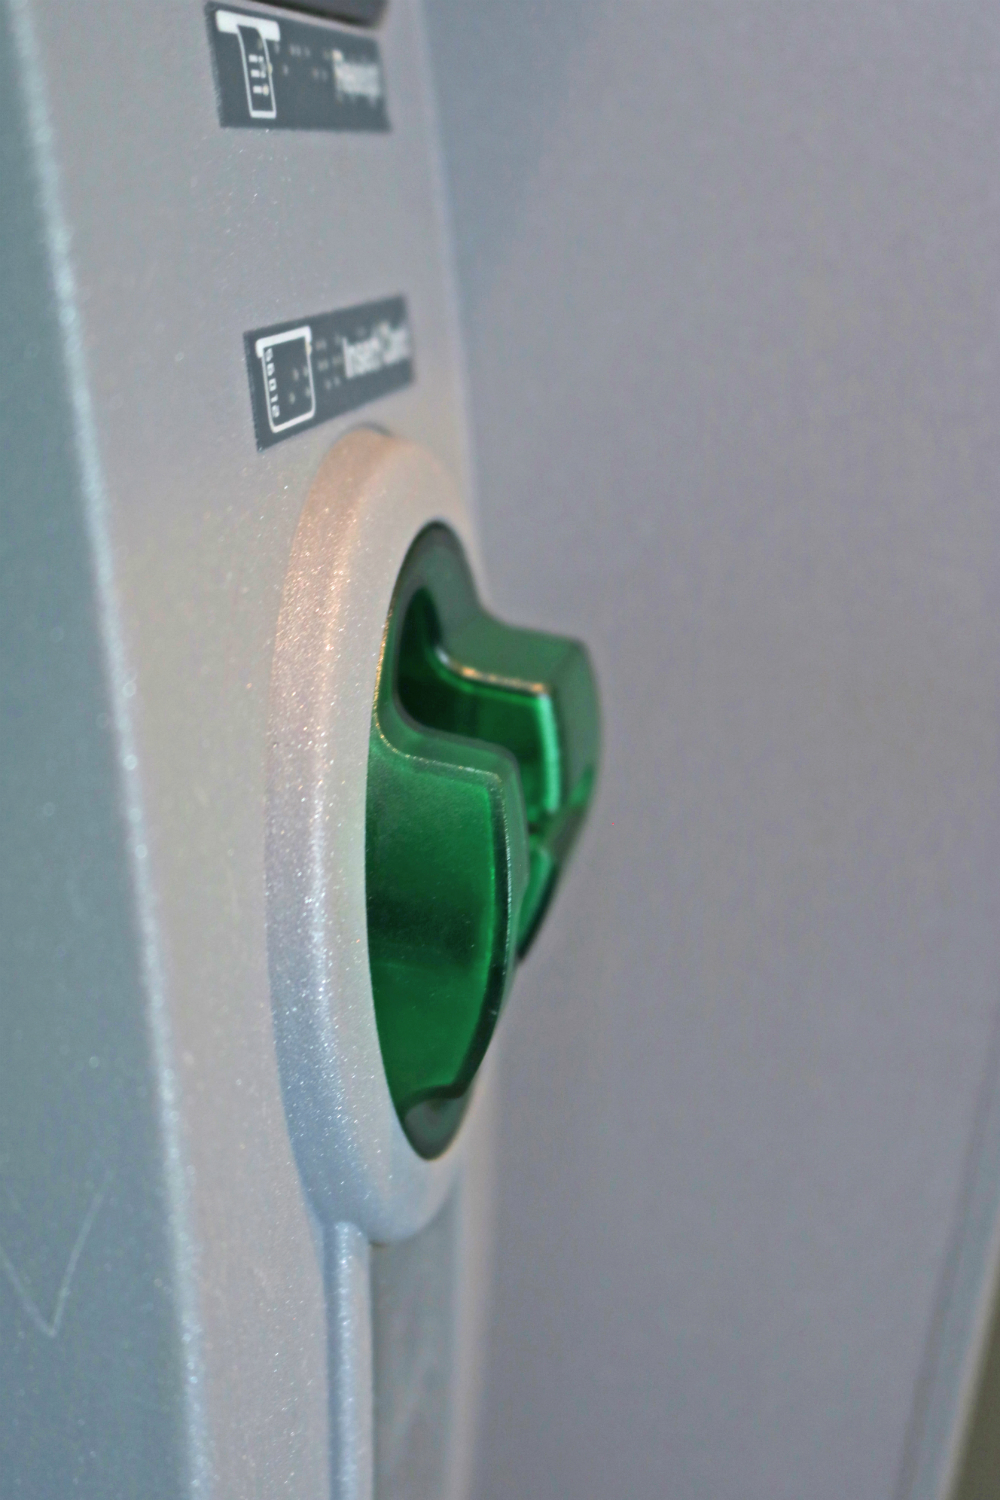 ATM card reader without a skimmer